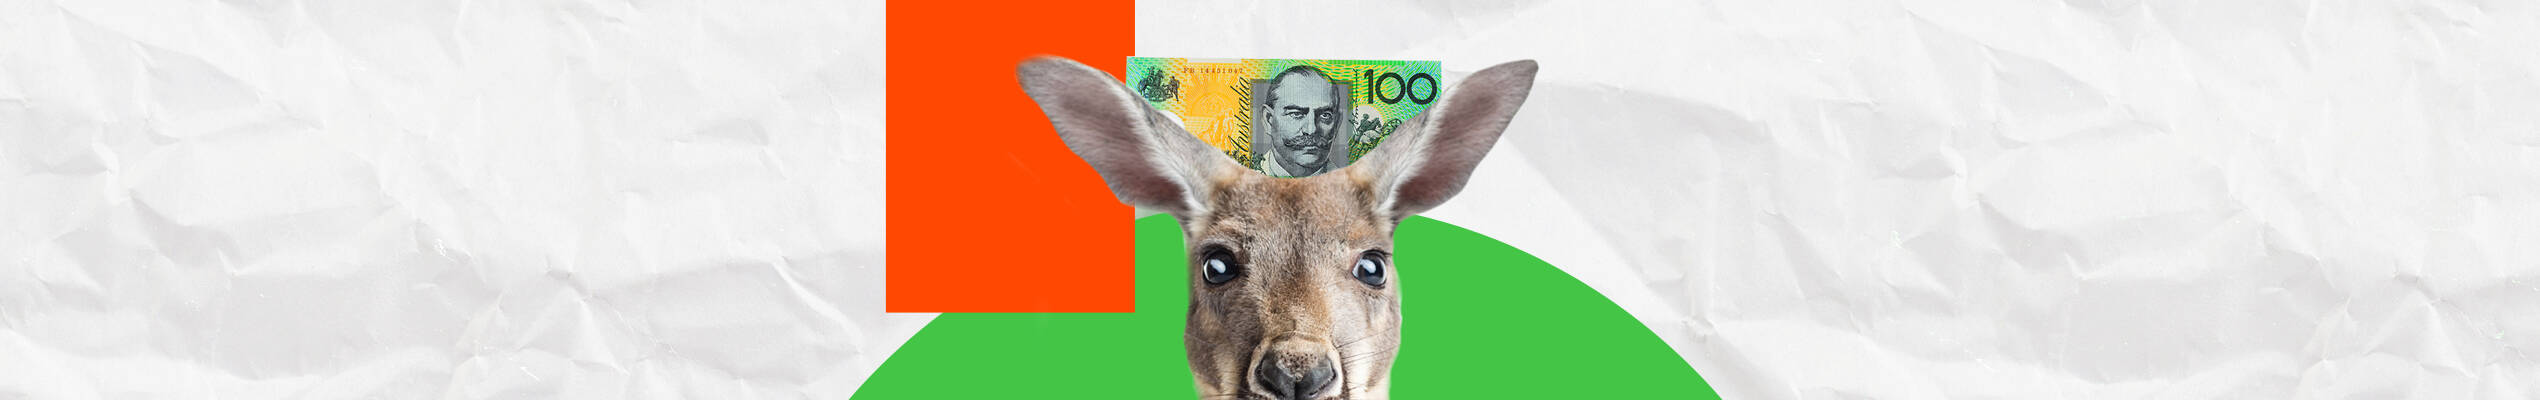 AUD/USD: to the six-year highs?